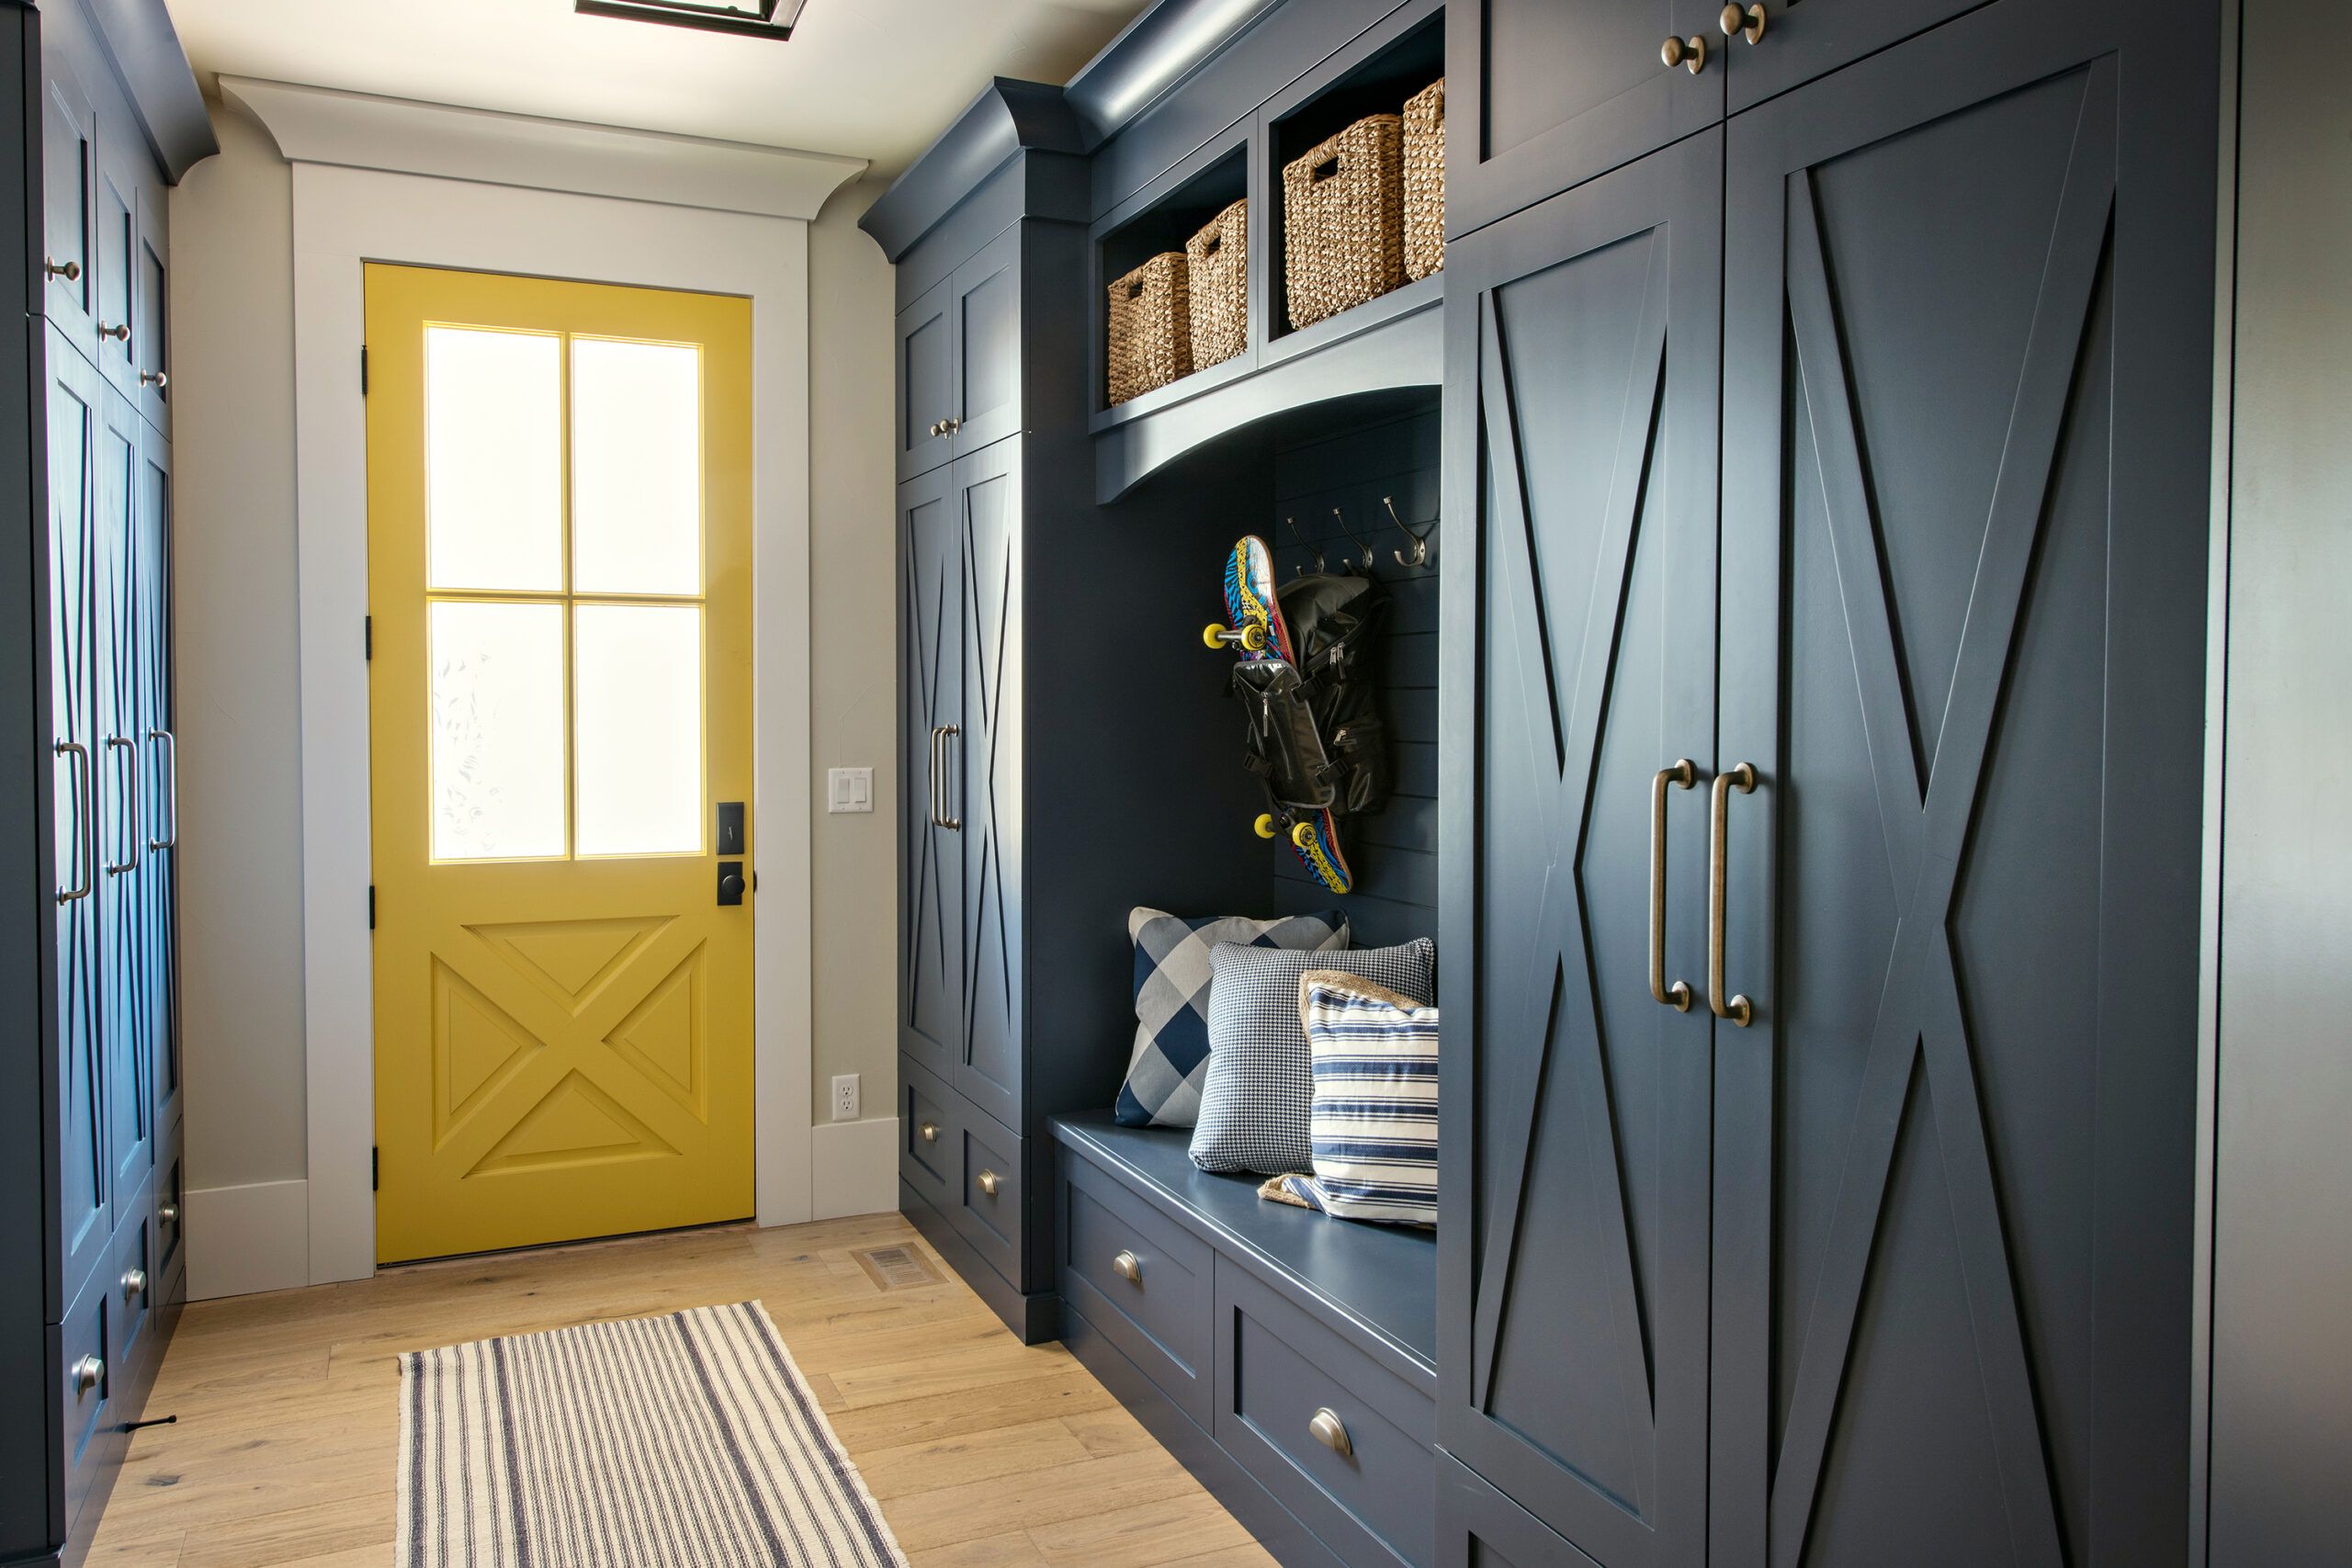 6 Helpful Storage Ideas For Your Mudroom - This Old House